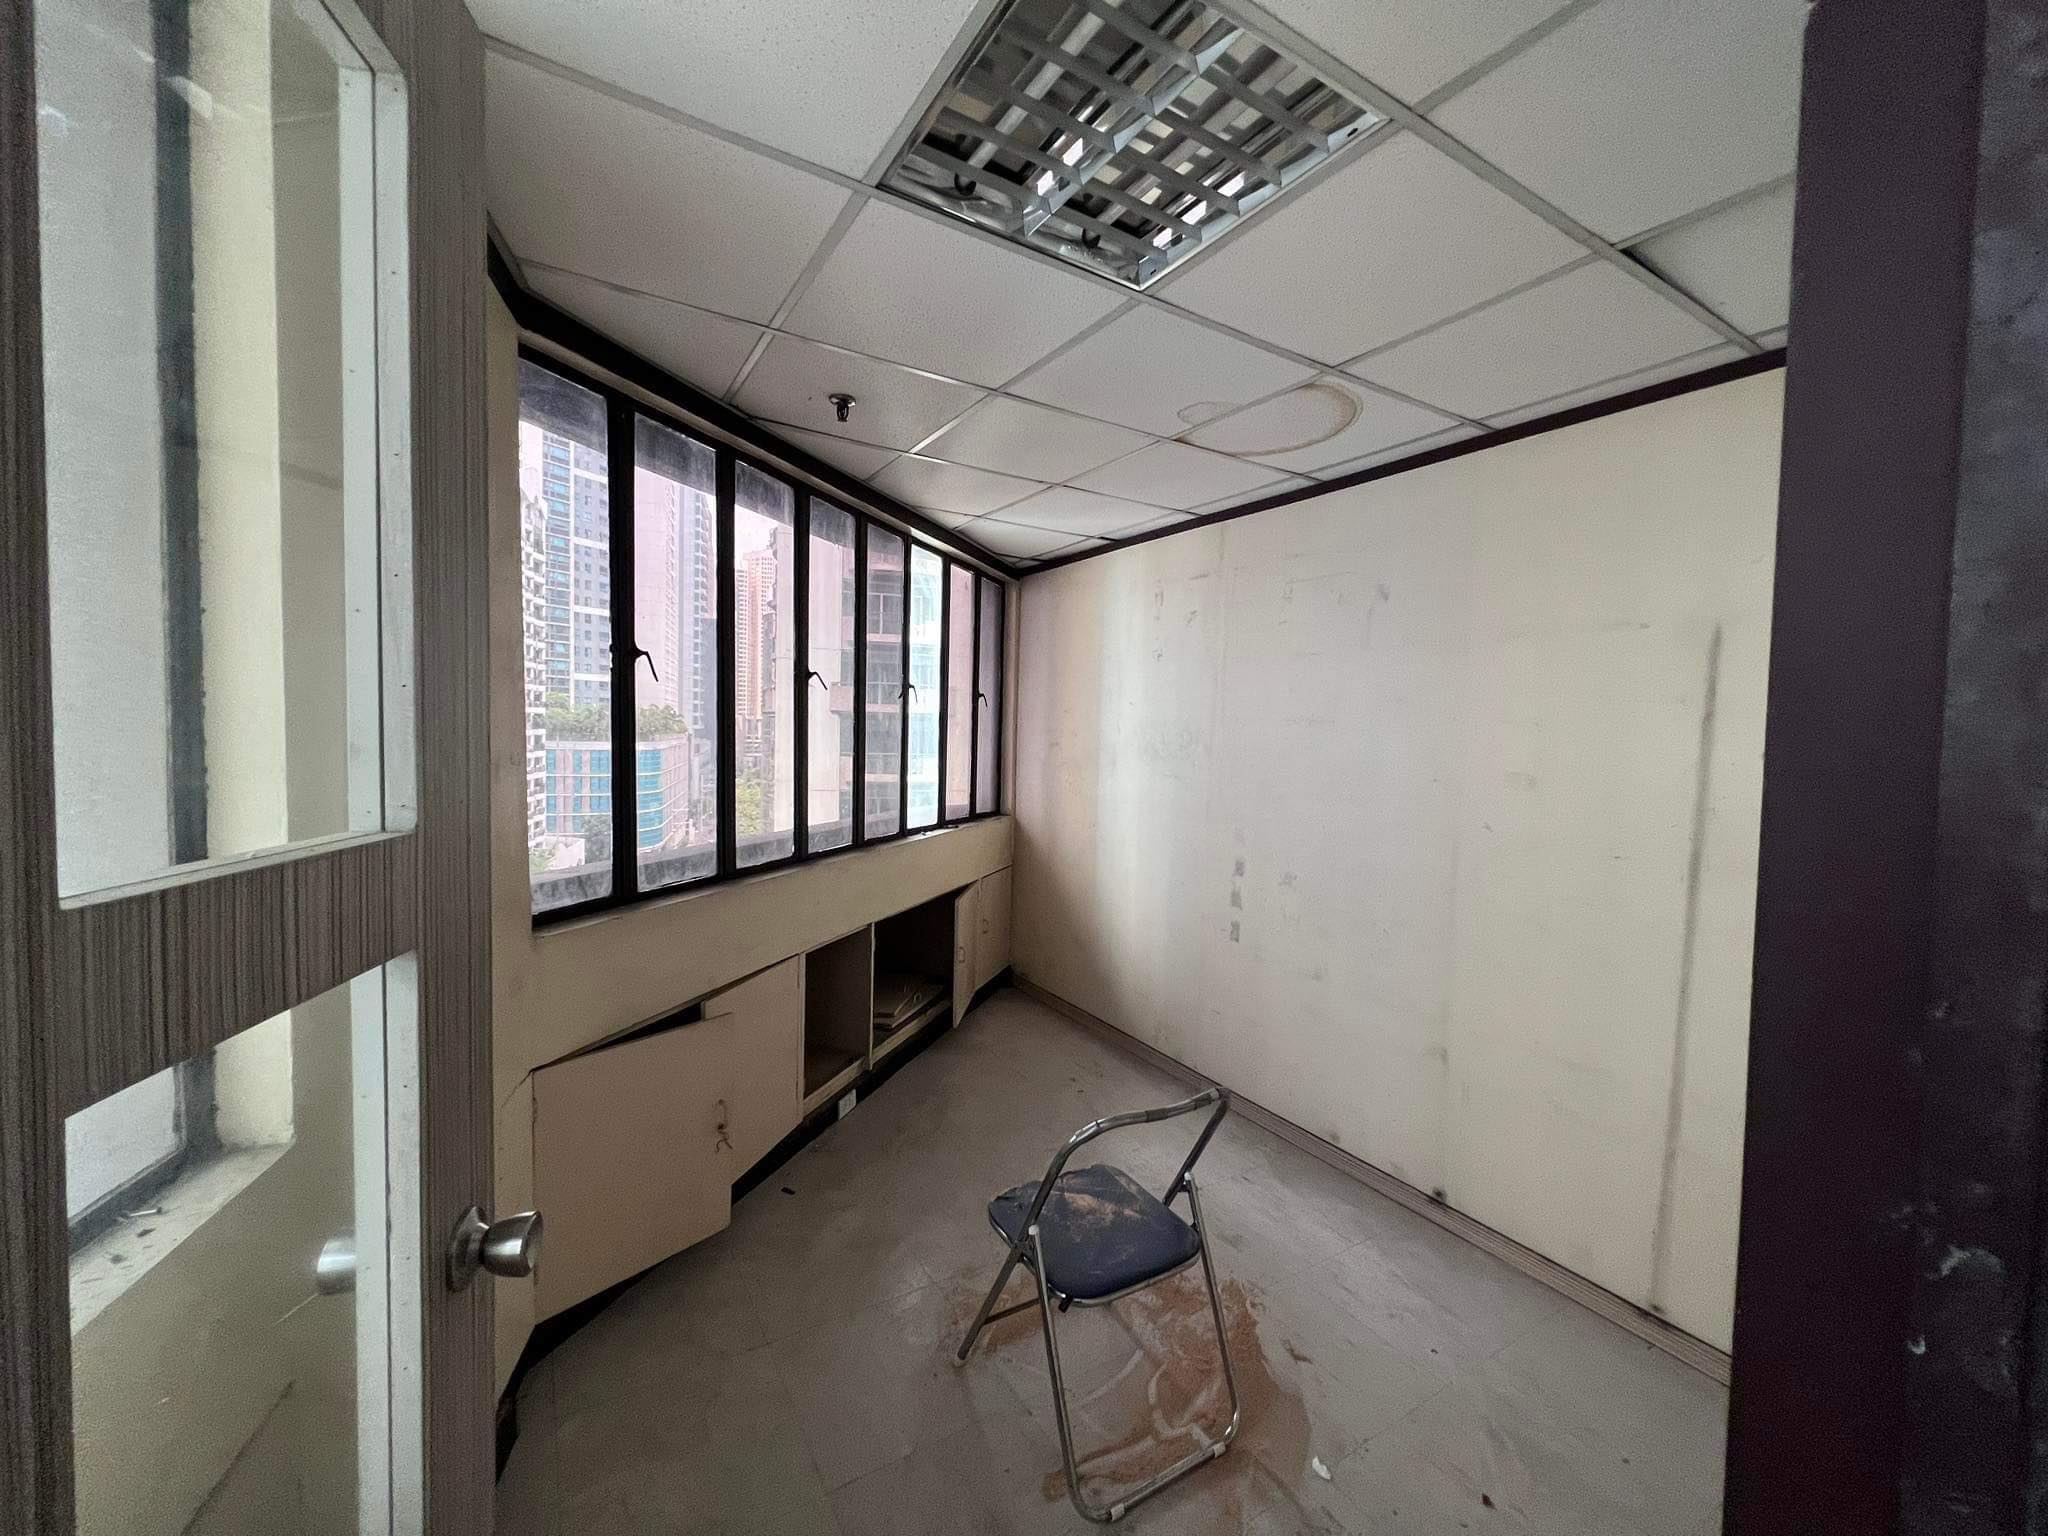 For Rent Lease Warm Shell Office Space Makati City Manila